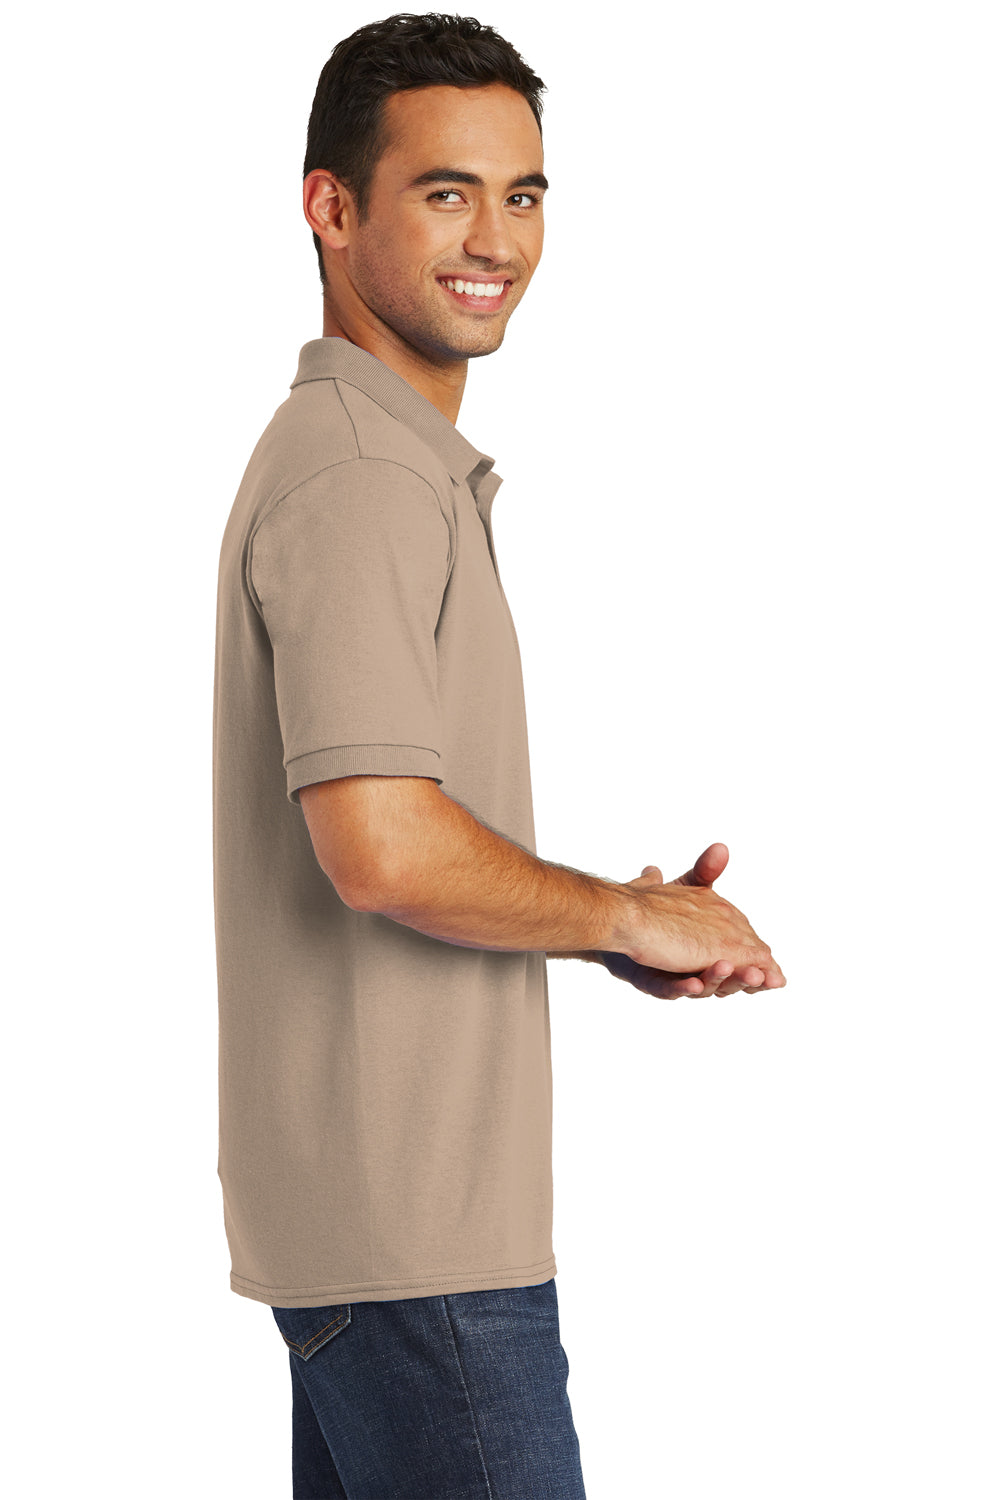 Port & Company KP55 Mens Core Stain Resistant Short Sleeve Polo Shirt Sand Brown Side